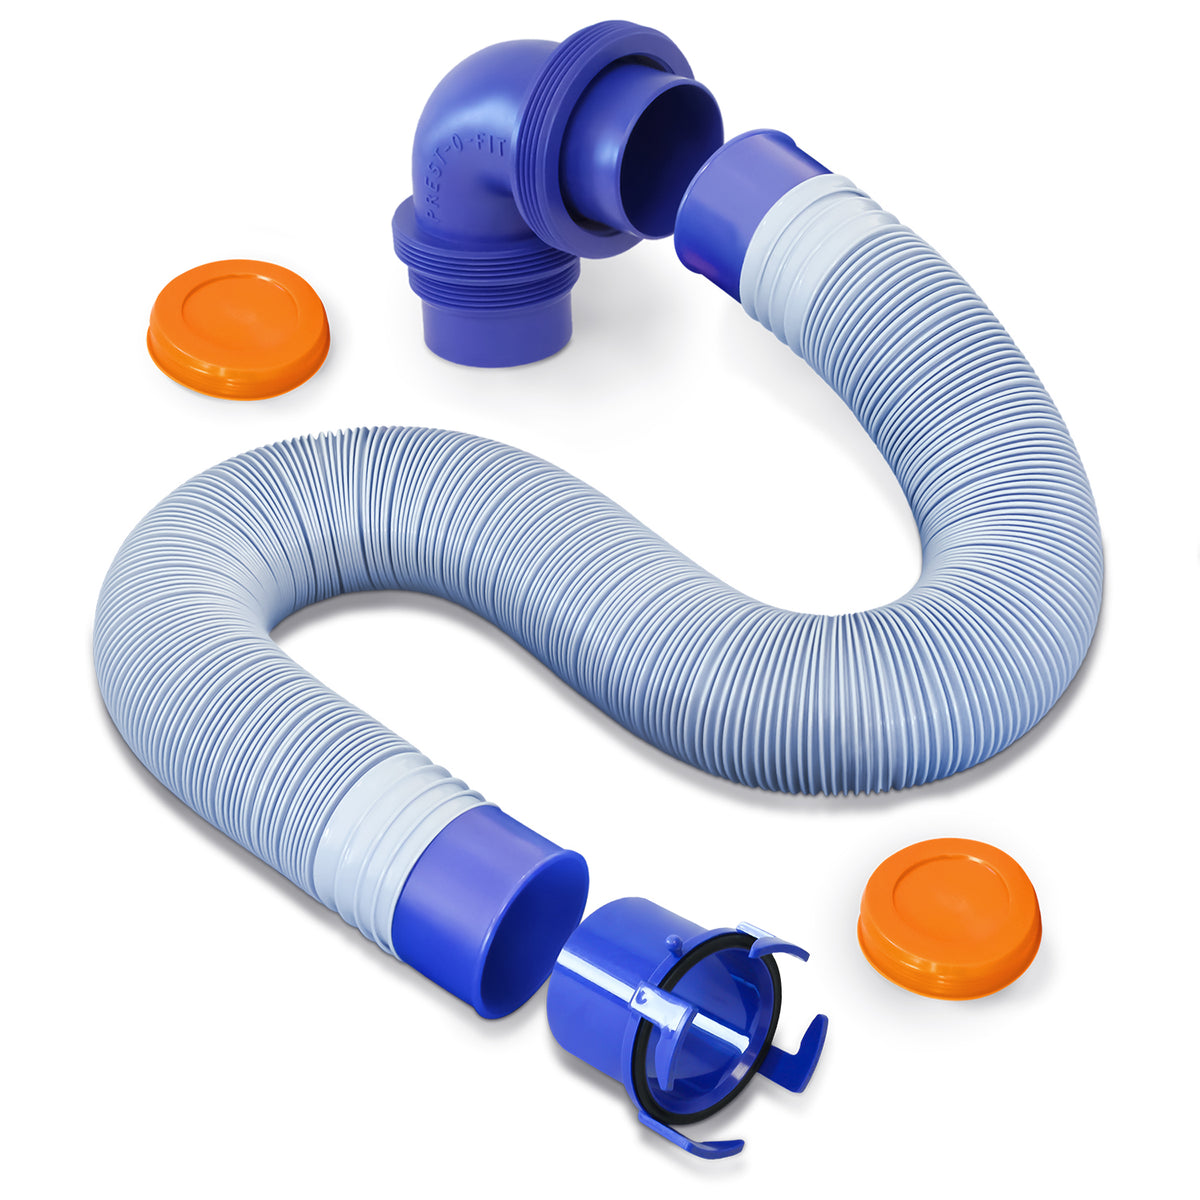 Blueline Quick Connect Sewer Kit